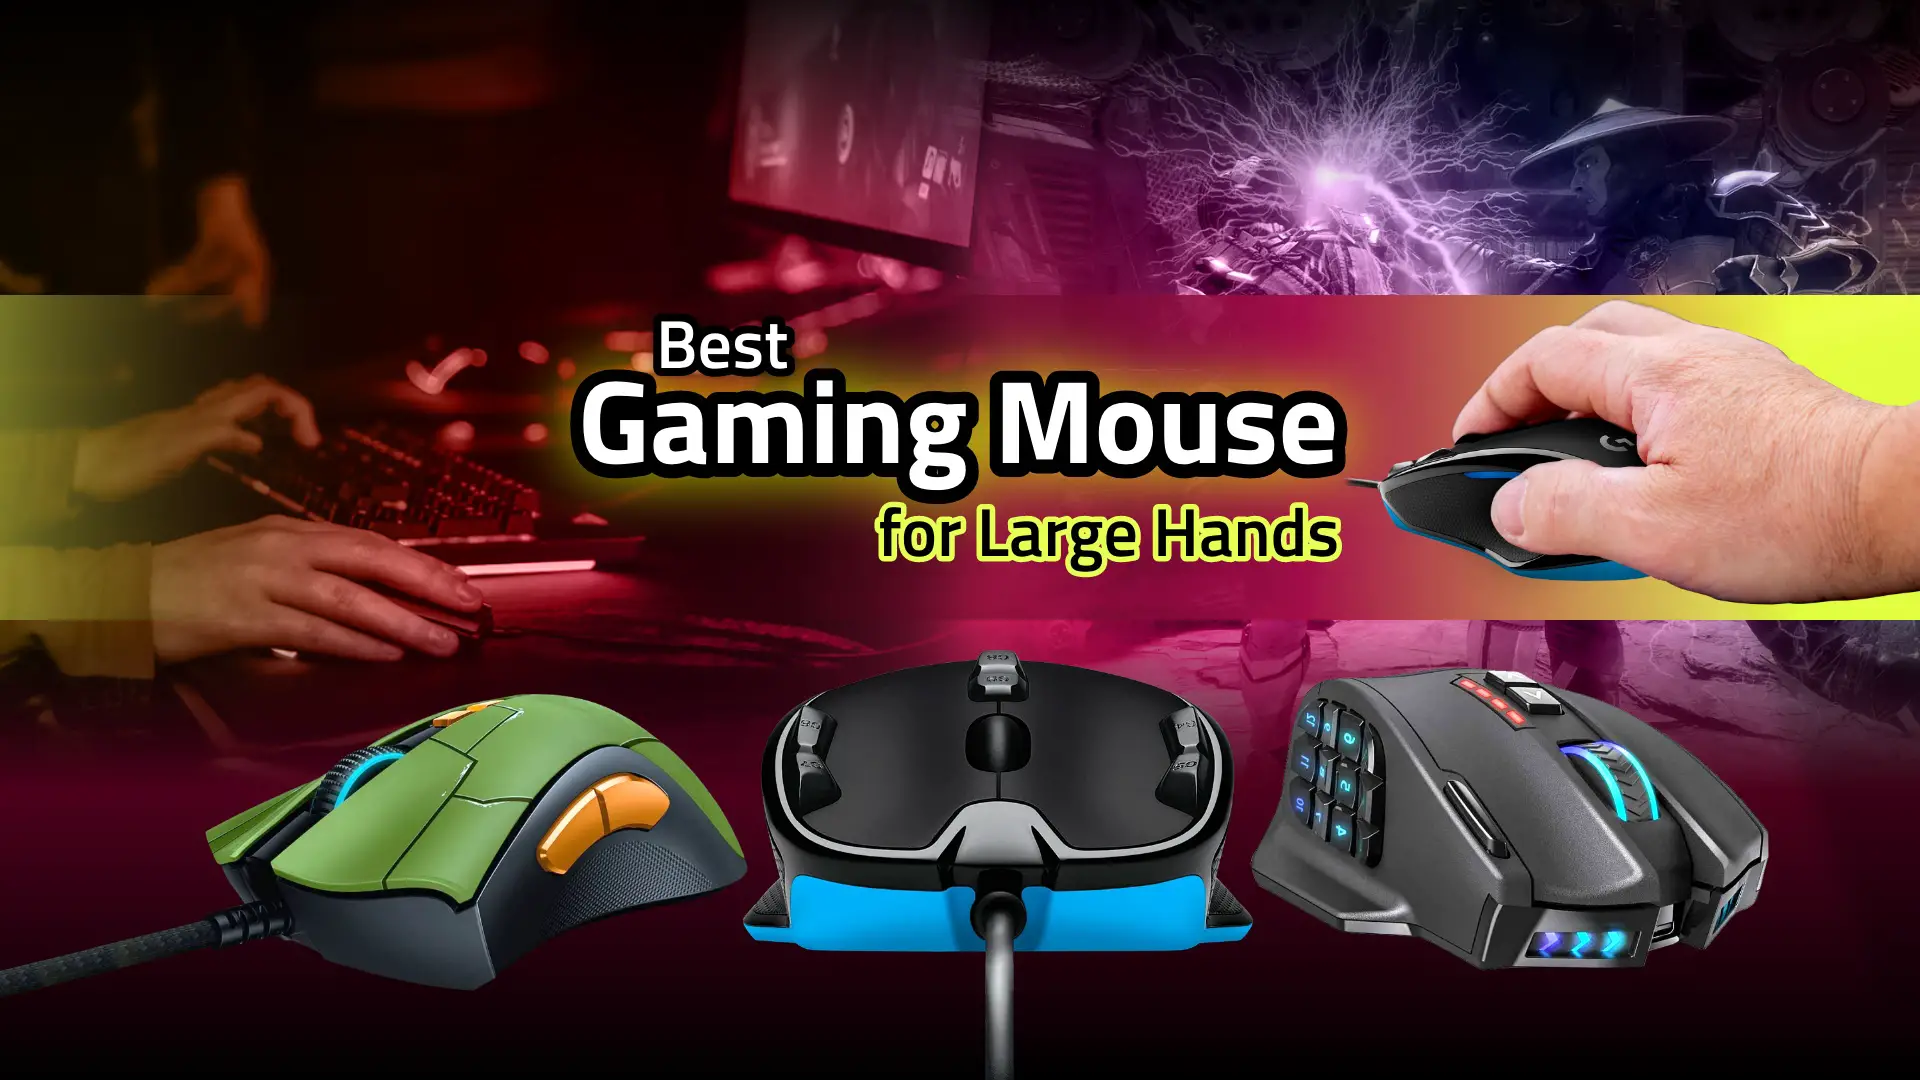 Best Gaming Mouse for Large Hands